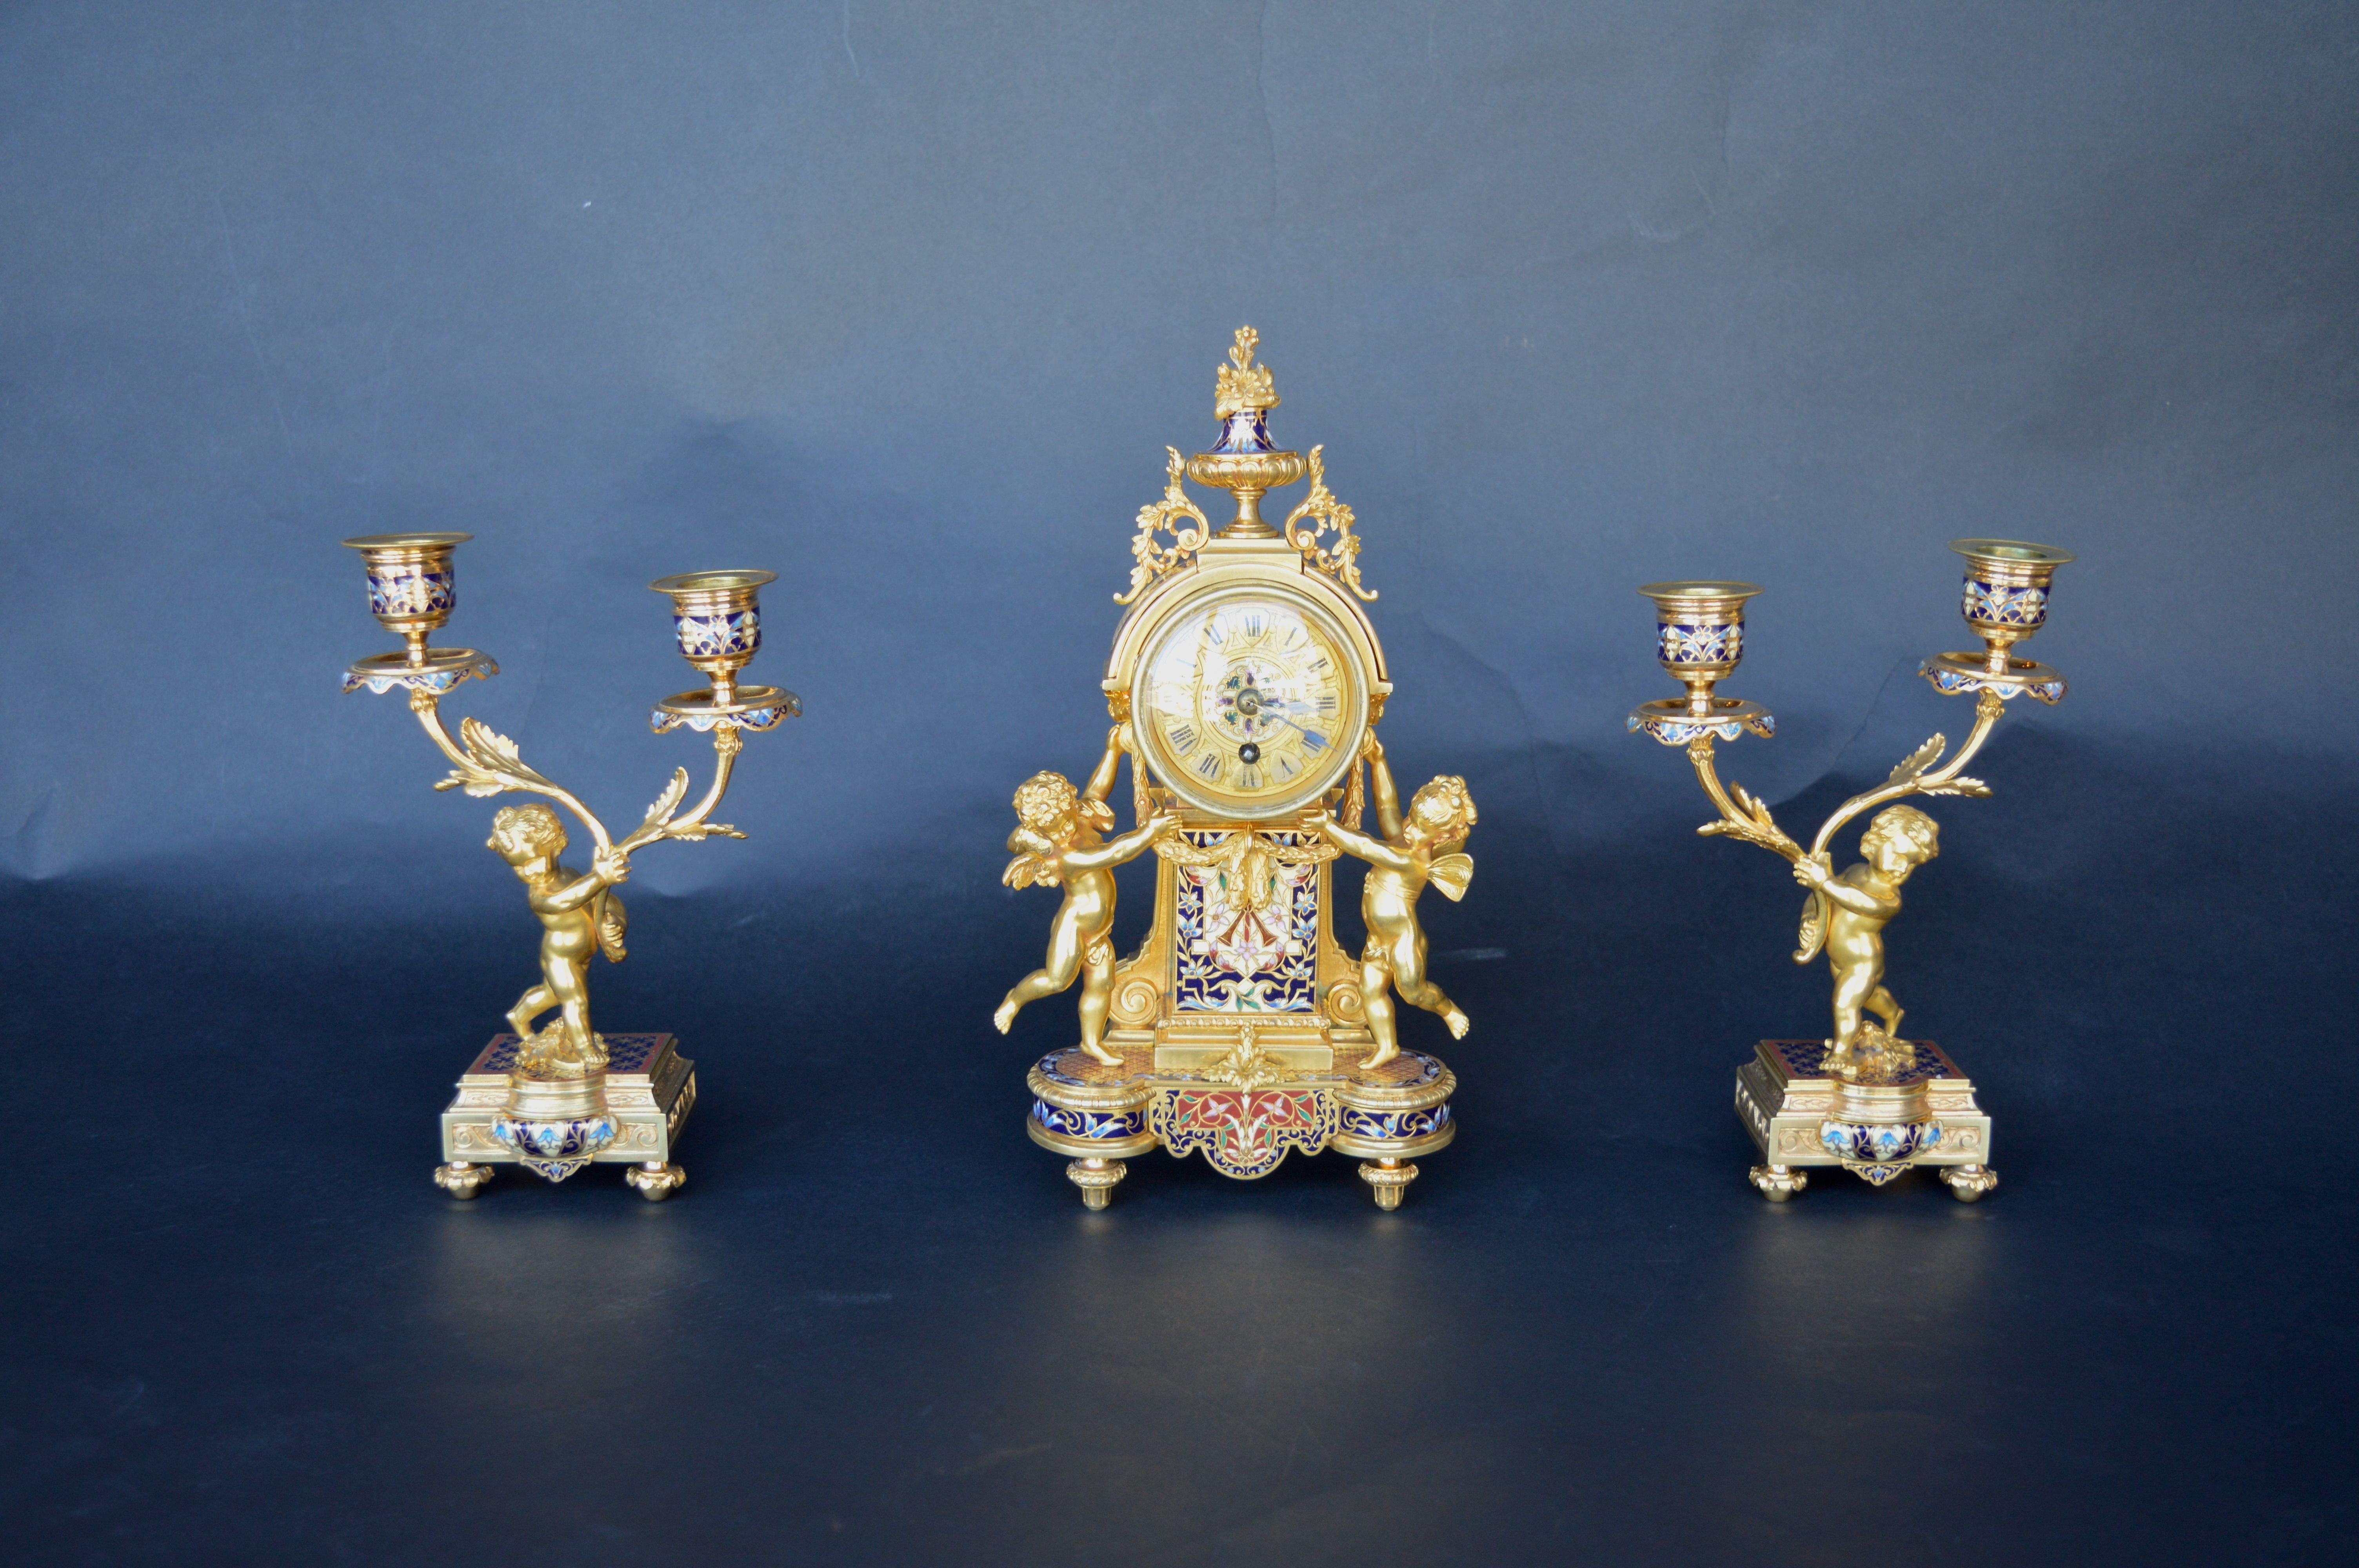 French 19th century champleve enamel clock set signed by Henry Paris

Dimensions:

Clock: 11